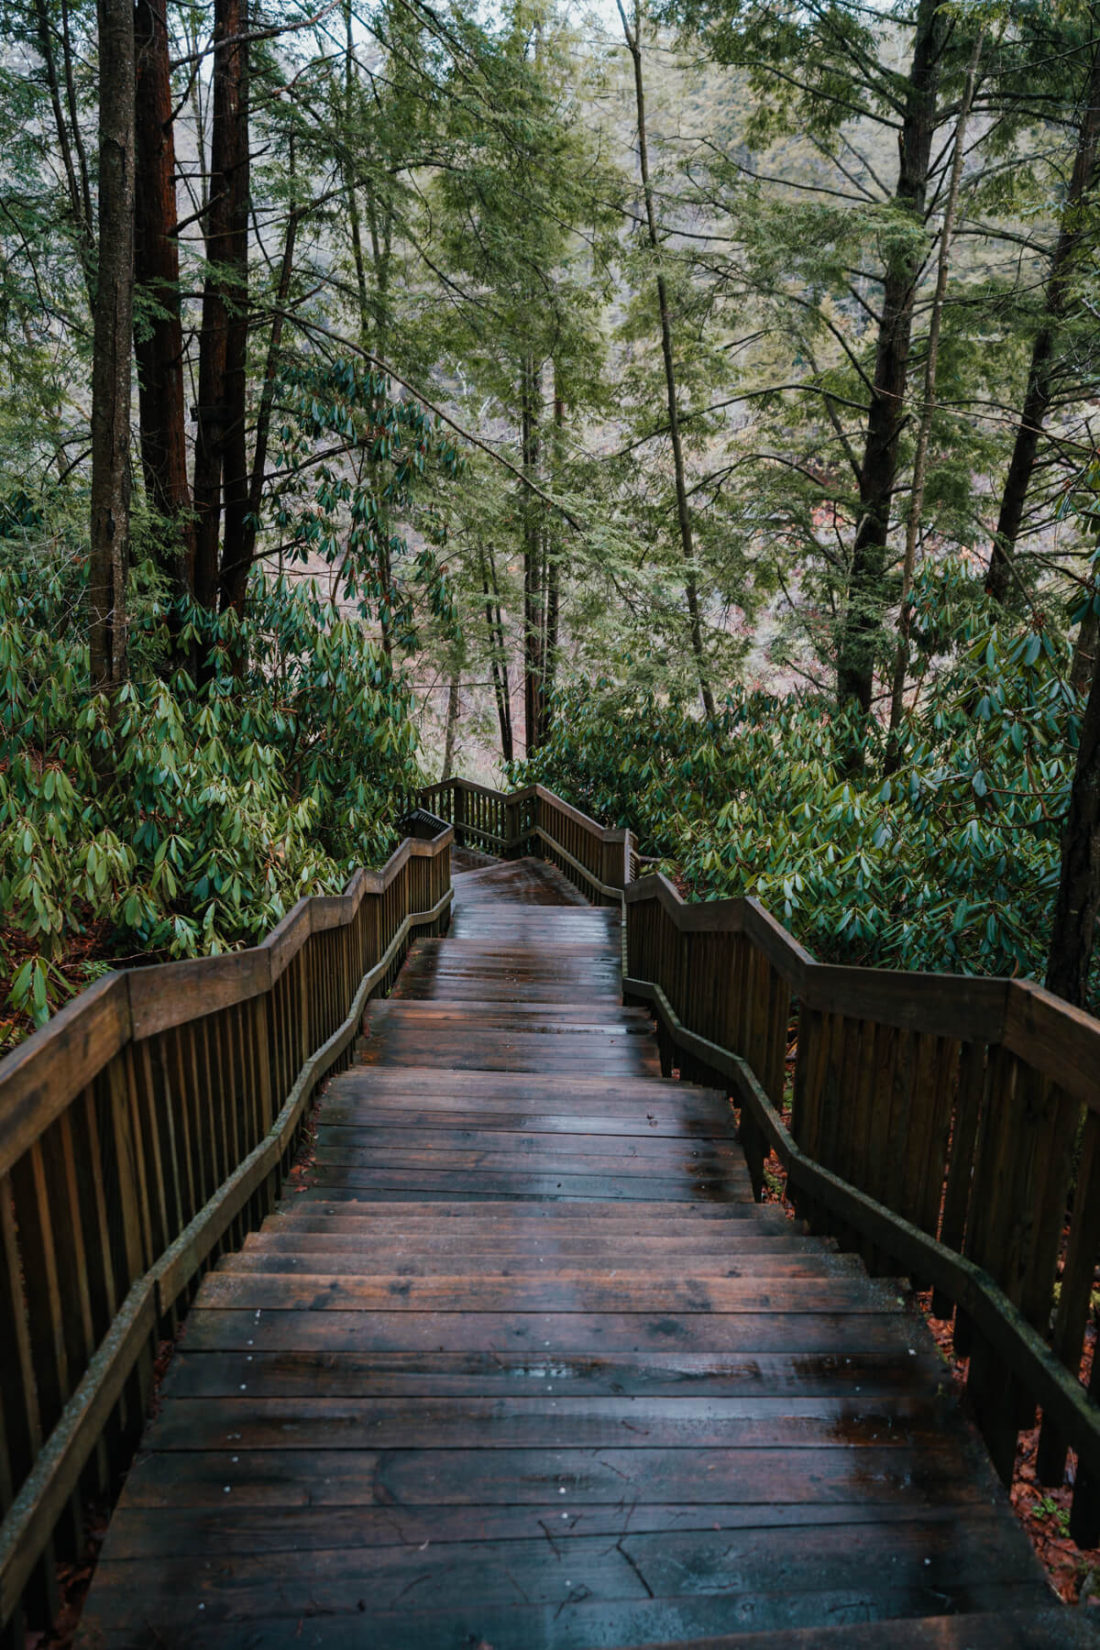 Boardwalk surrounded by lush vegetation in Blackwater Falls State Park